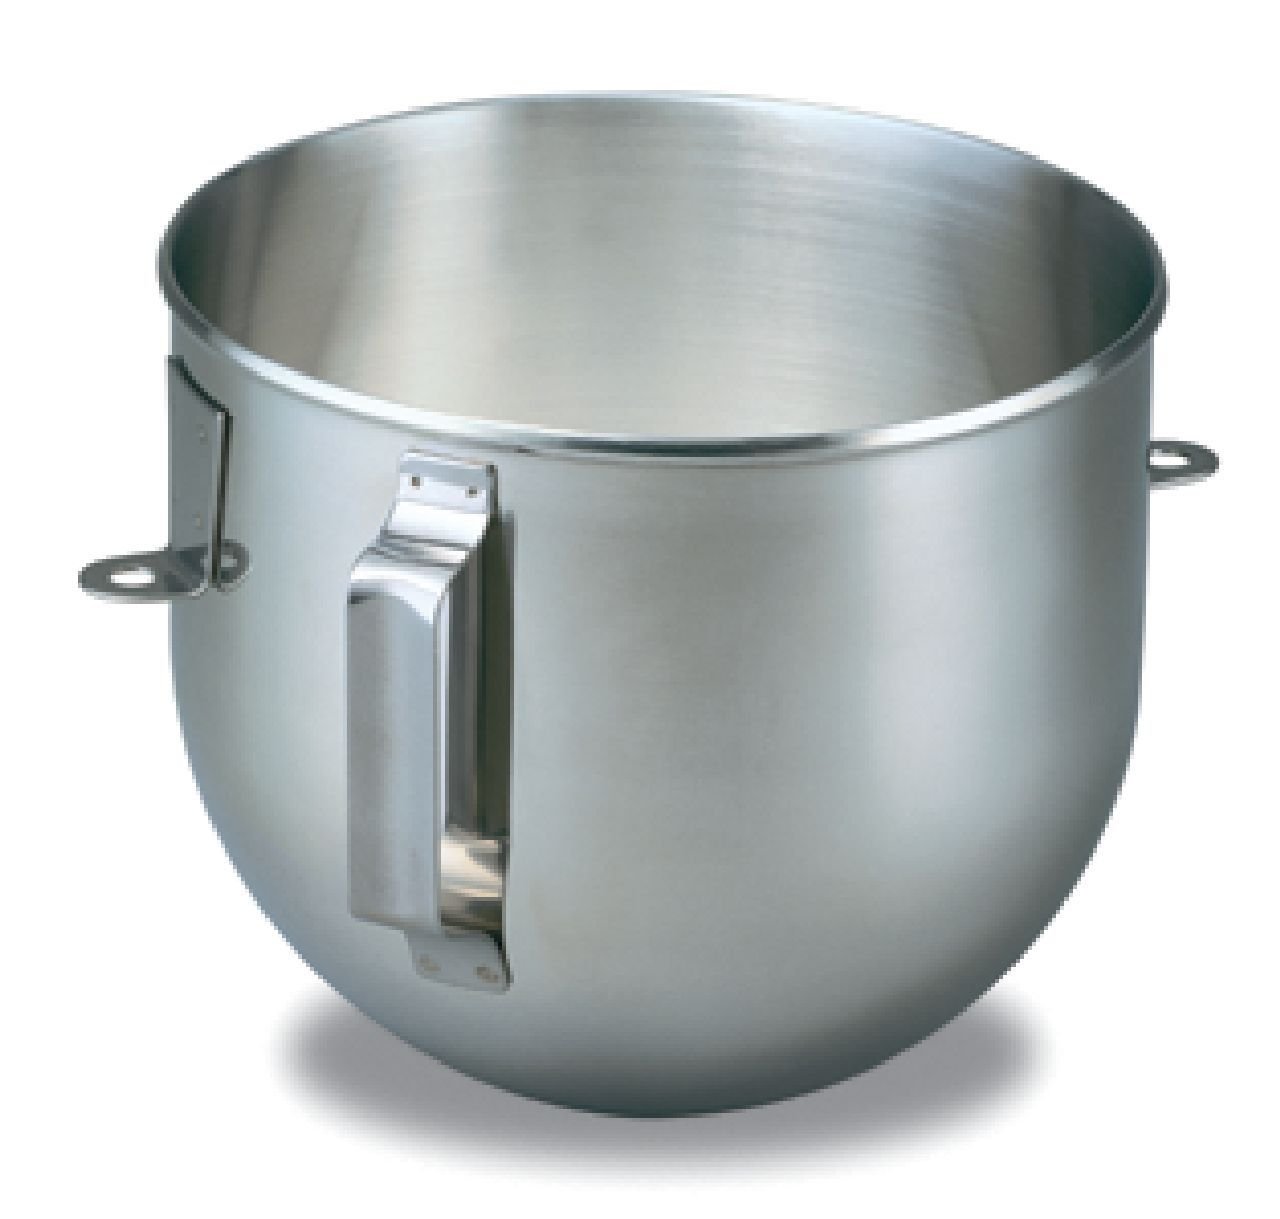 4.5 Quart Polished Stainless Steel Bowl with Handle